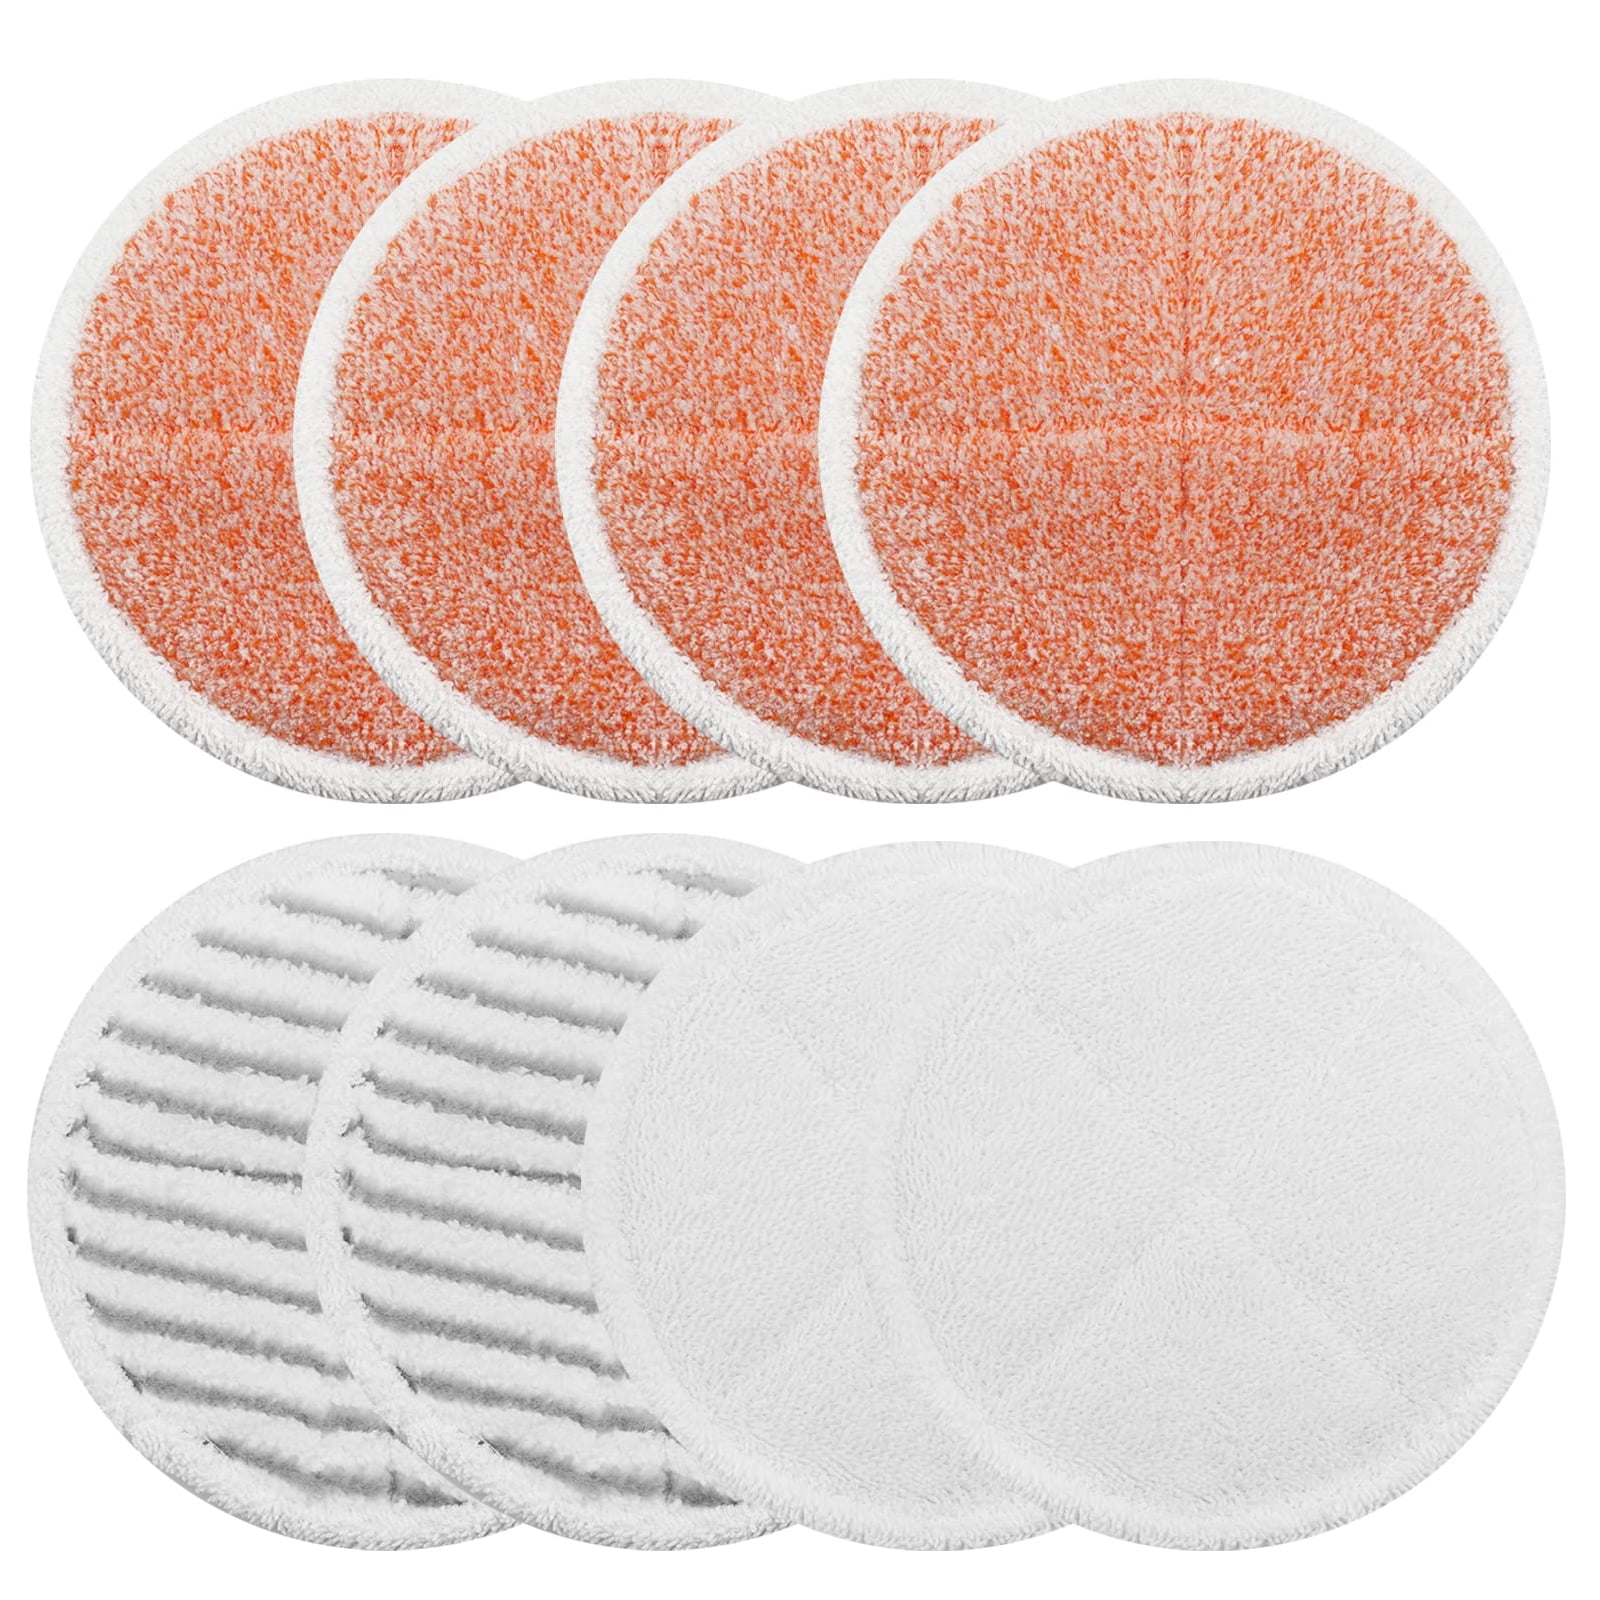 8 Packs Spinwave Mop Pad Kit Replacement Pads for Bissell Spinwave 2039A 2124 